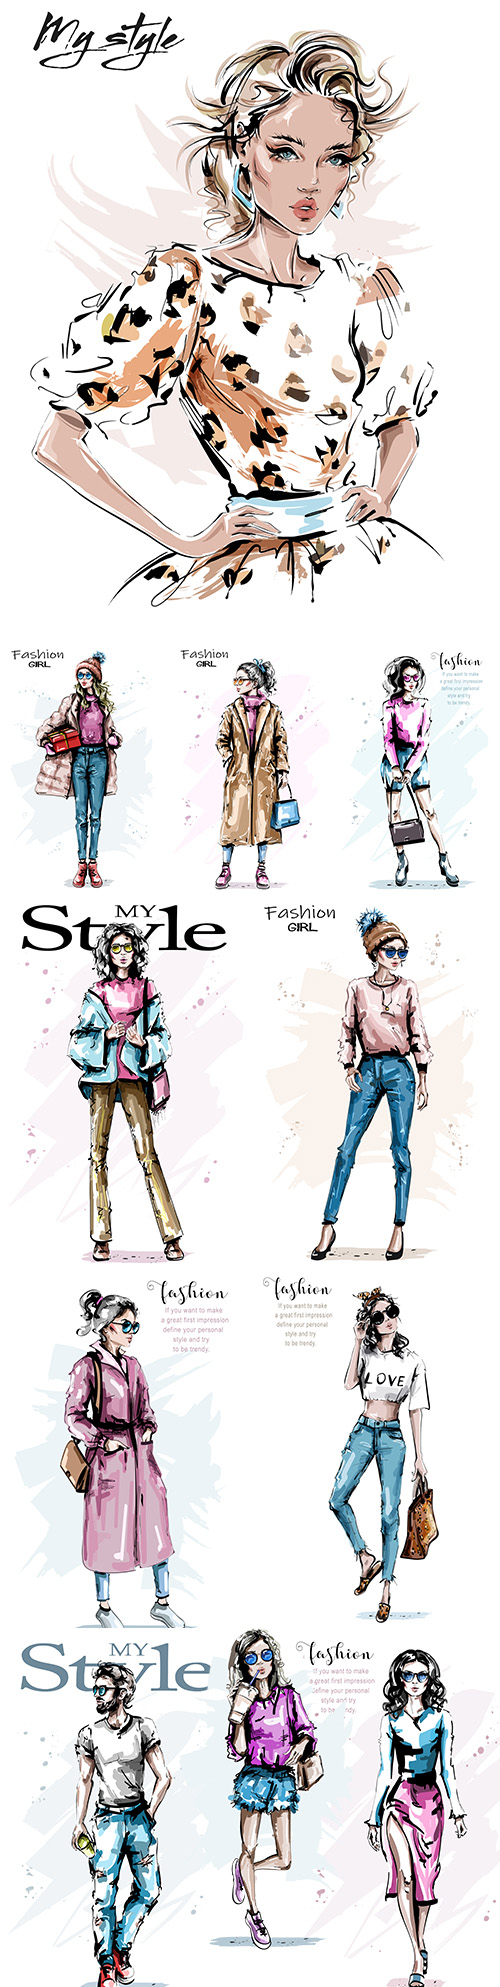 My style fashion girl and guy drawn illustrations 7
